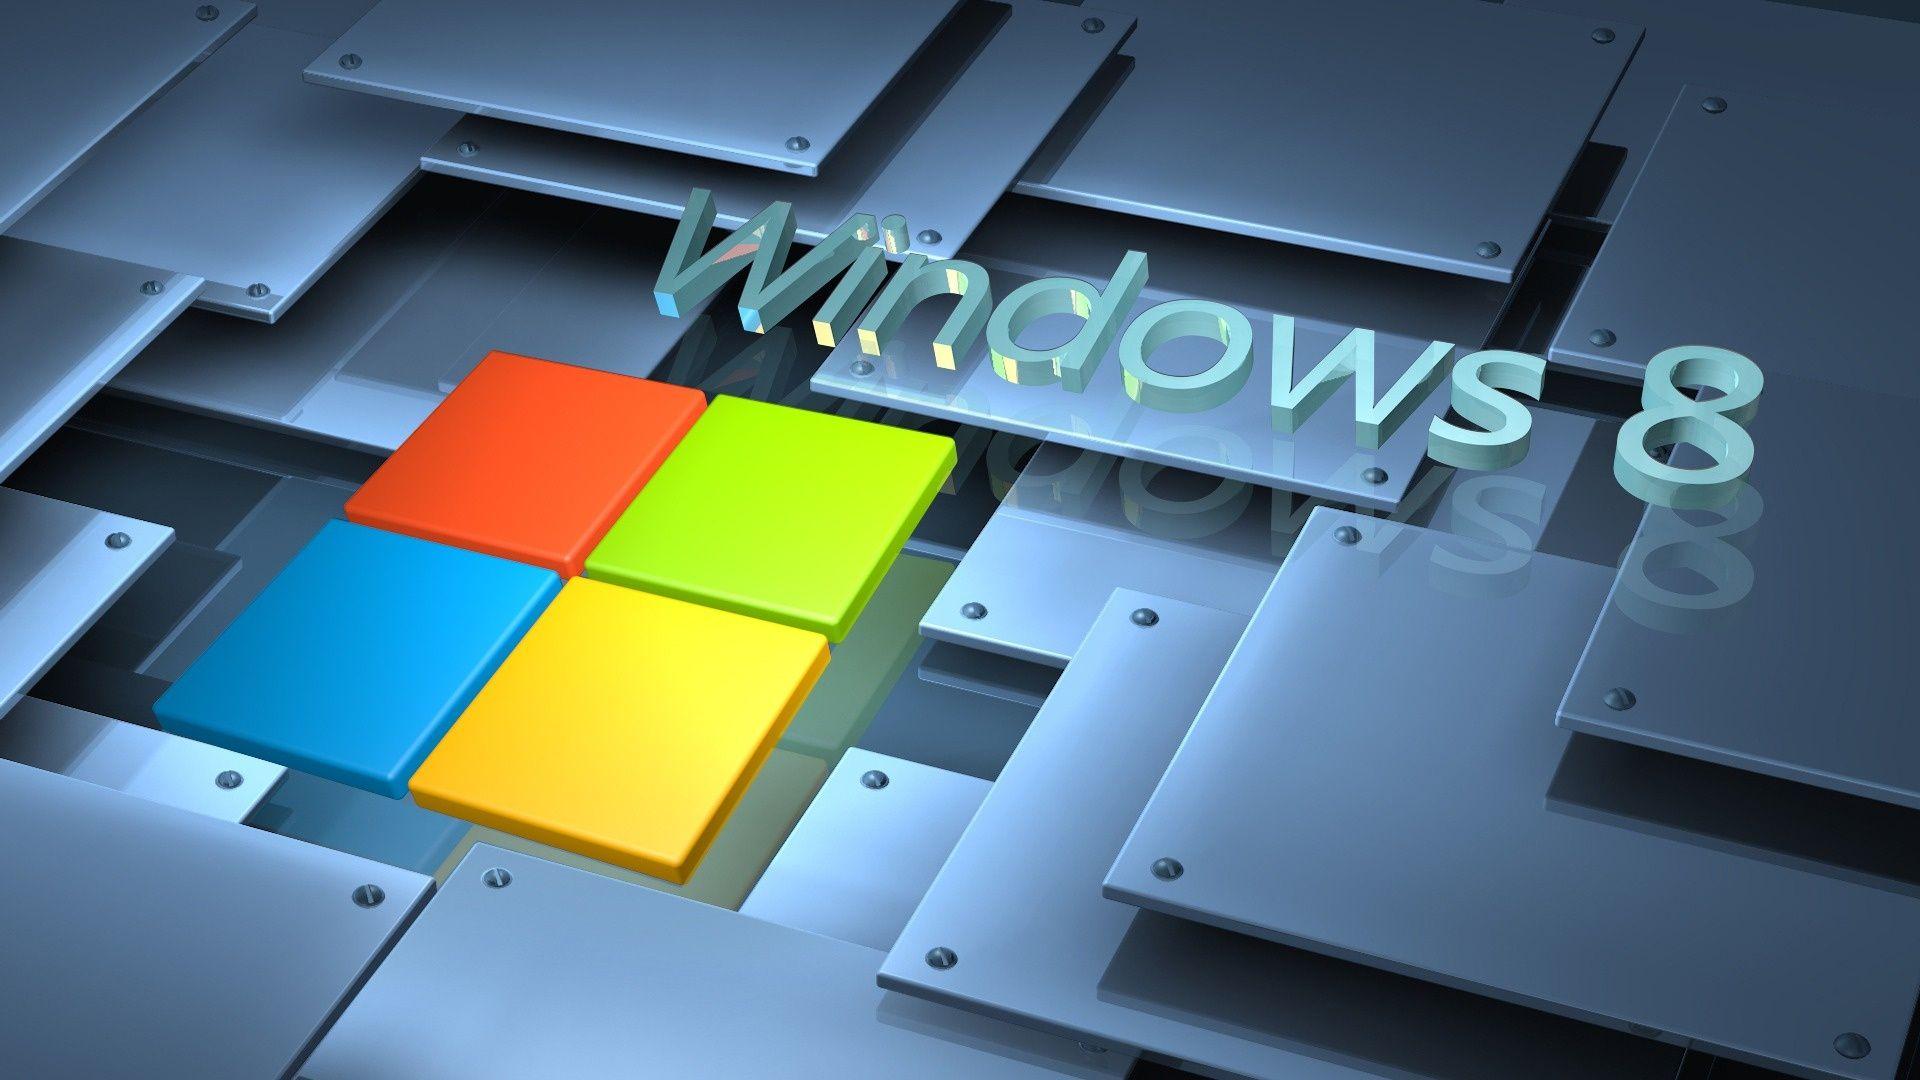 Download 3D Wallpapers For PC Windows 8 Pictures 5 HD Wallpapers